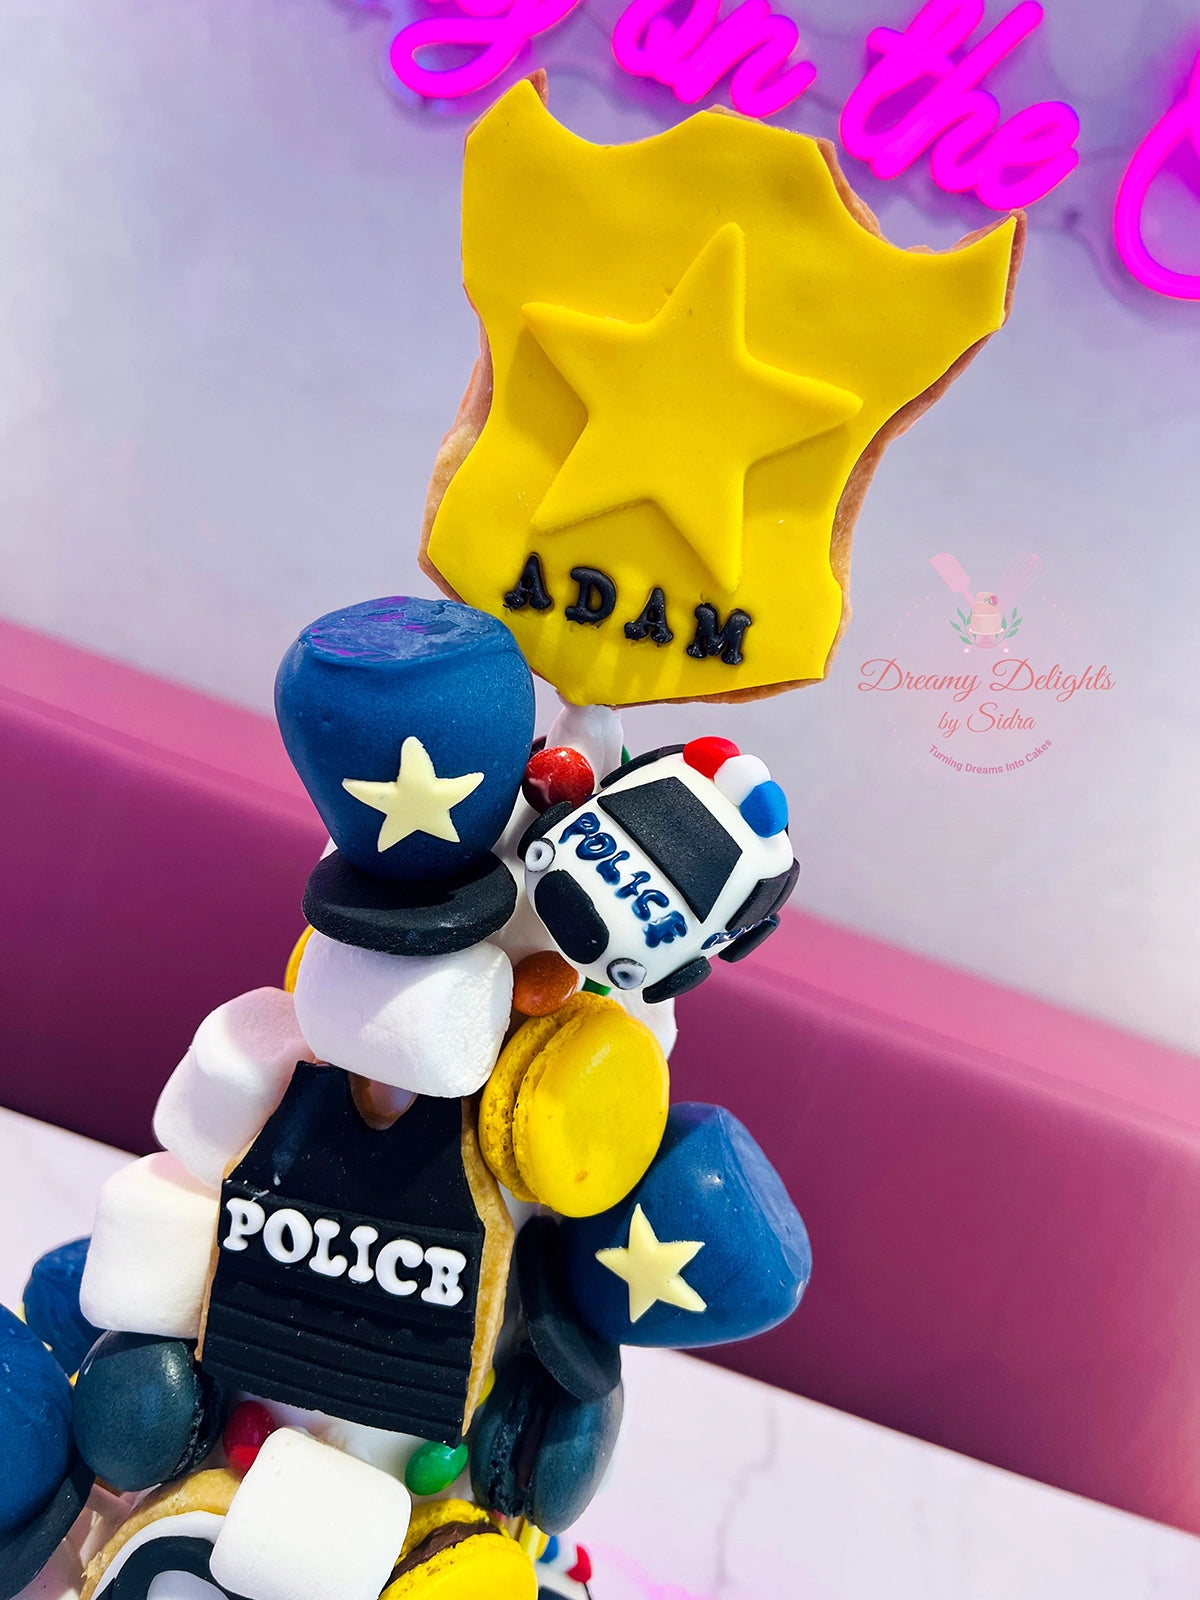 Cakepops, cookie & Macaron police tower